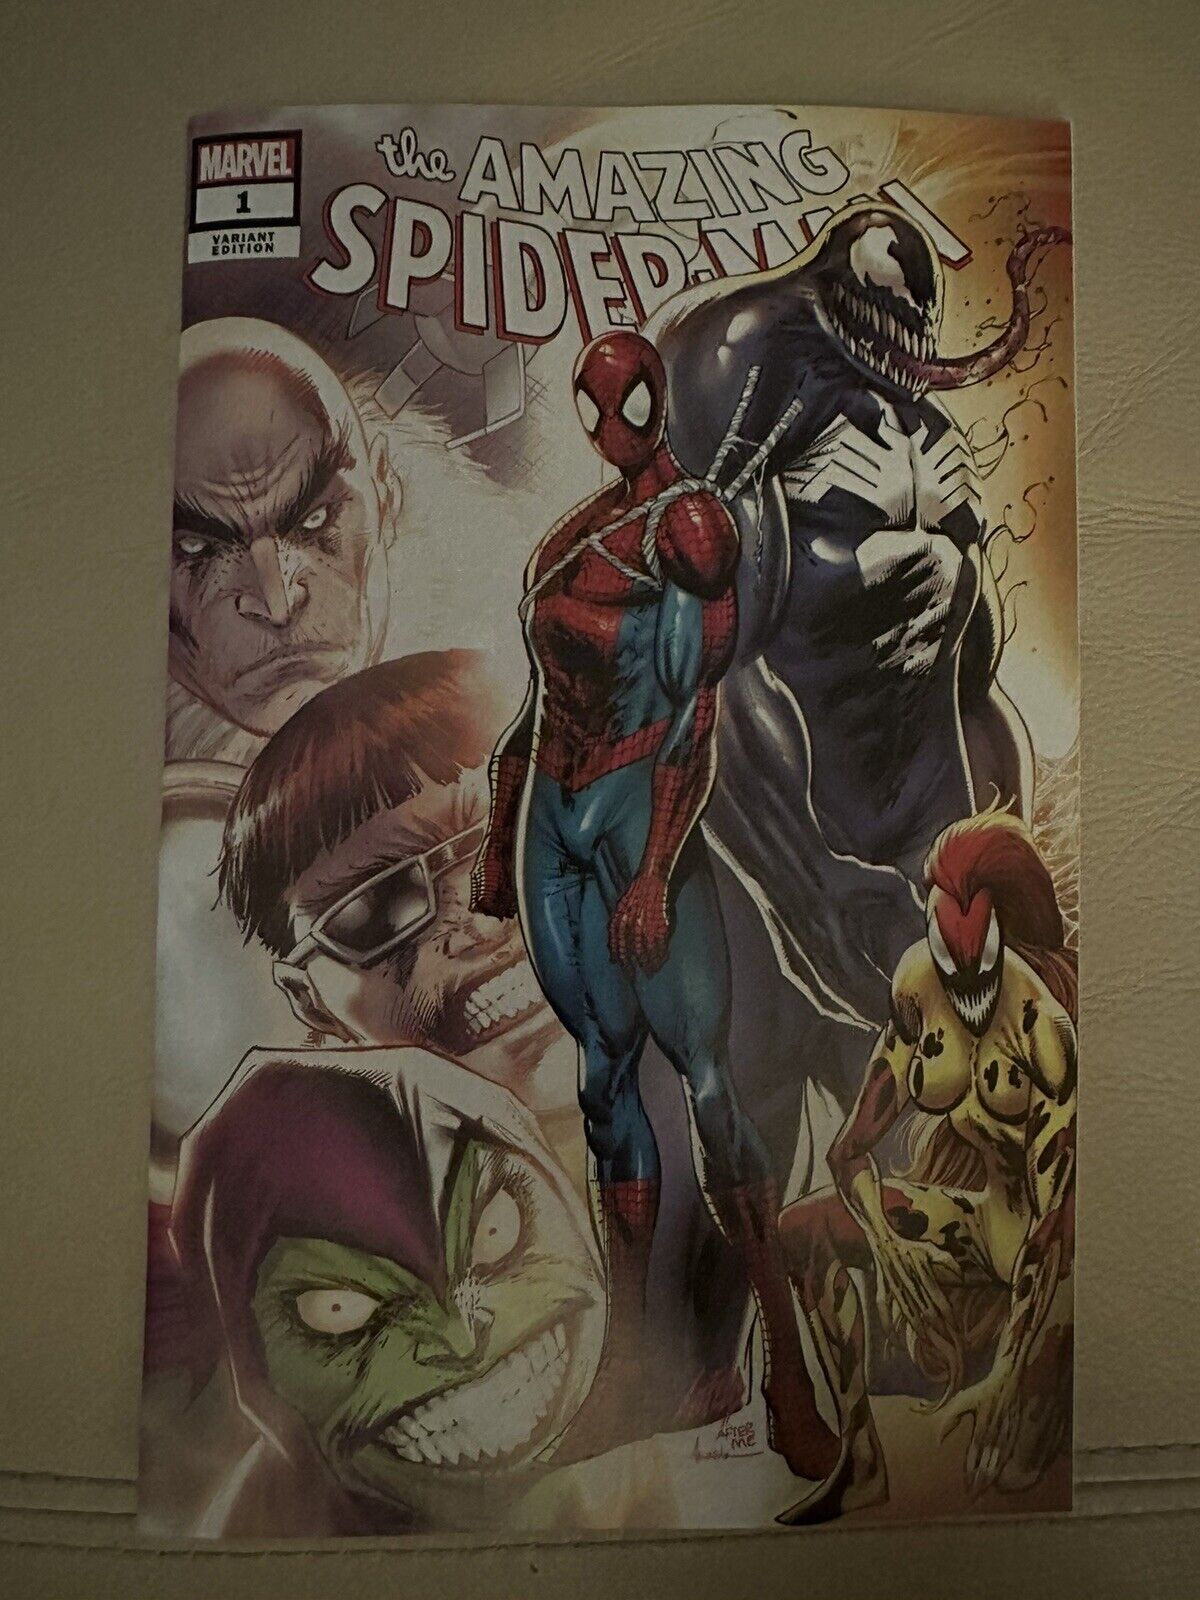 THE AMAZING SPIDER-MAN #1 Whatnot Rare Rob Liefeld Trade Variant Brand New